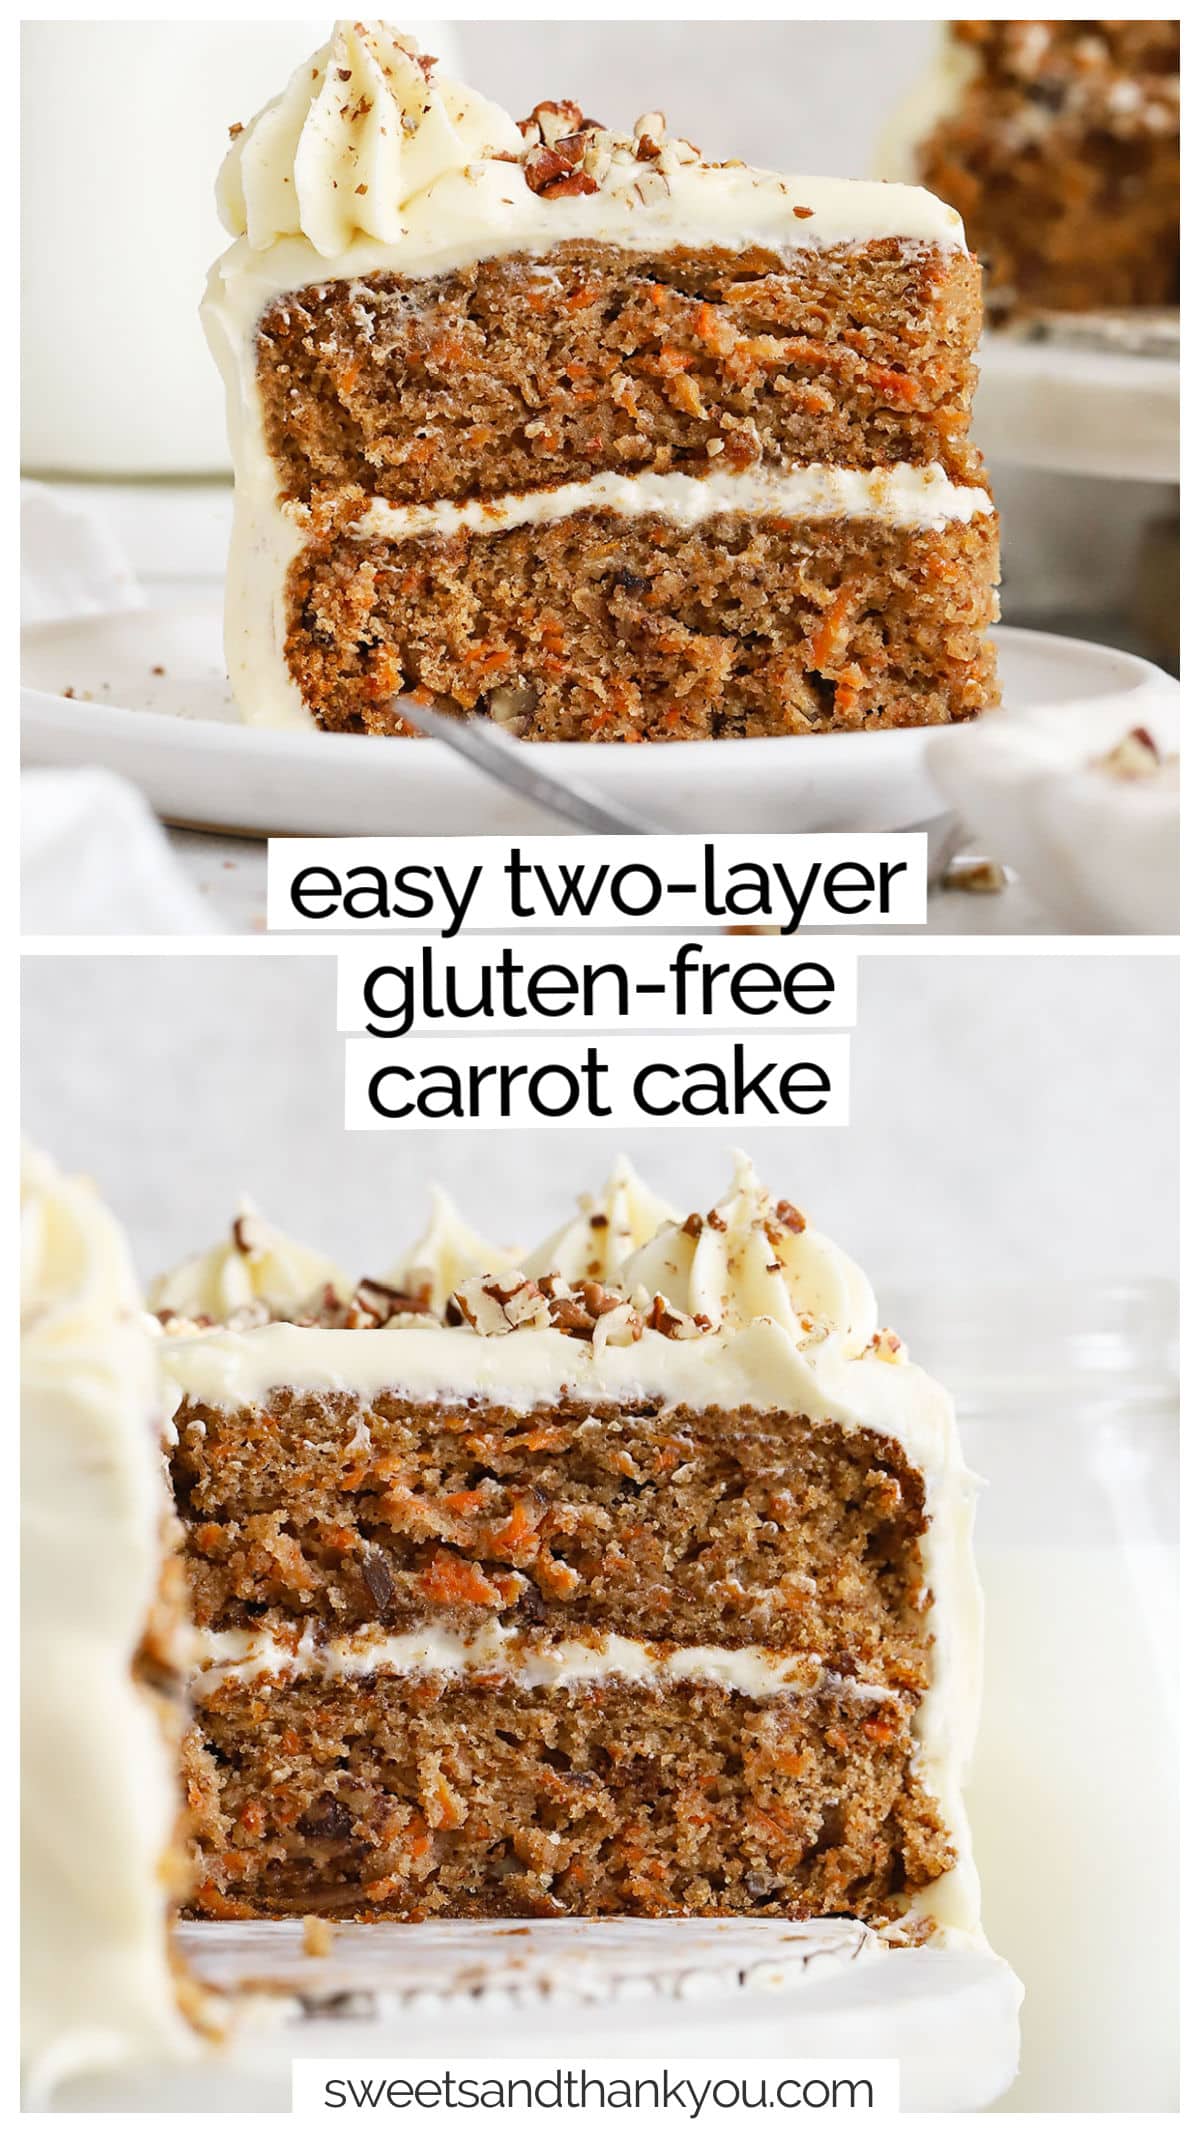 Our soft, fluffy Gluten-Free Carrot Cake recipe is made with two beautiful layers and an easy cream cheese frosting that make it feel special for any occasion. This carrot layer cake is the perfect gluten-free Easter dessert or spring treat for baby showers, spring parties, or celebrations. It's also an amazing gluten-free birthday cake! Don't miss our tips for decorating in the post!